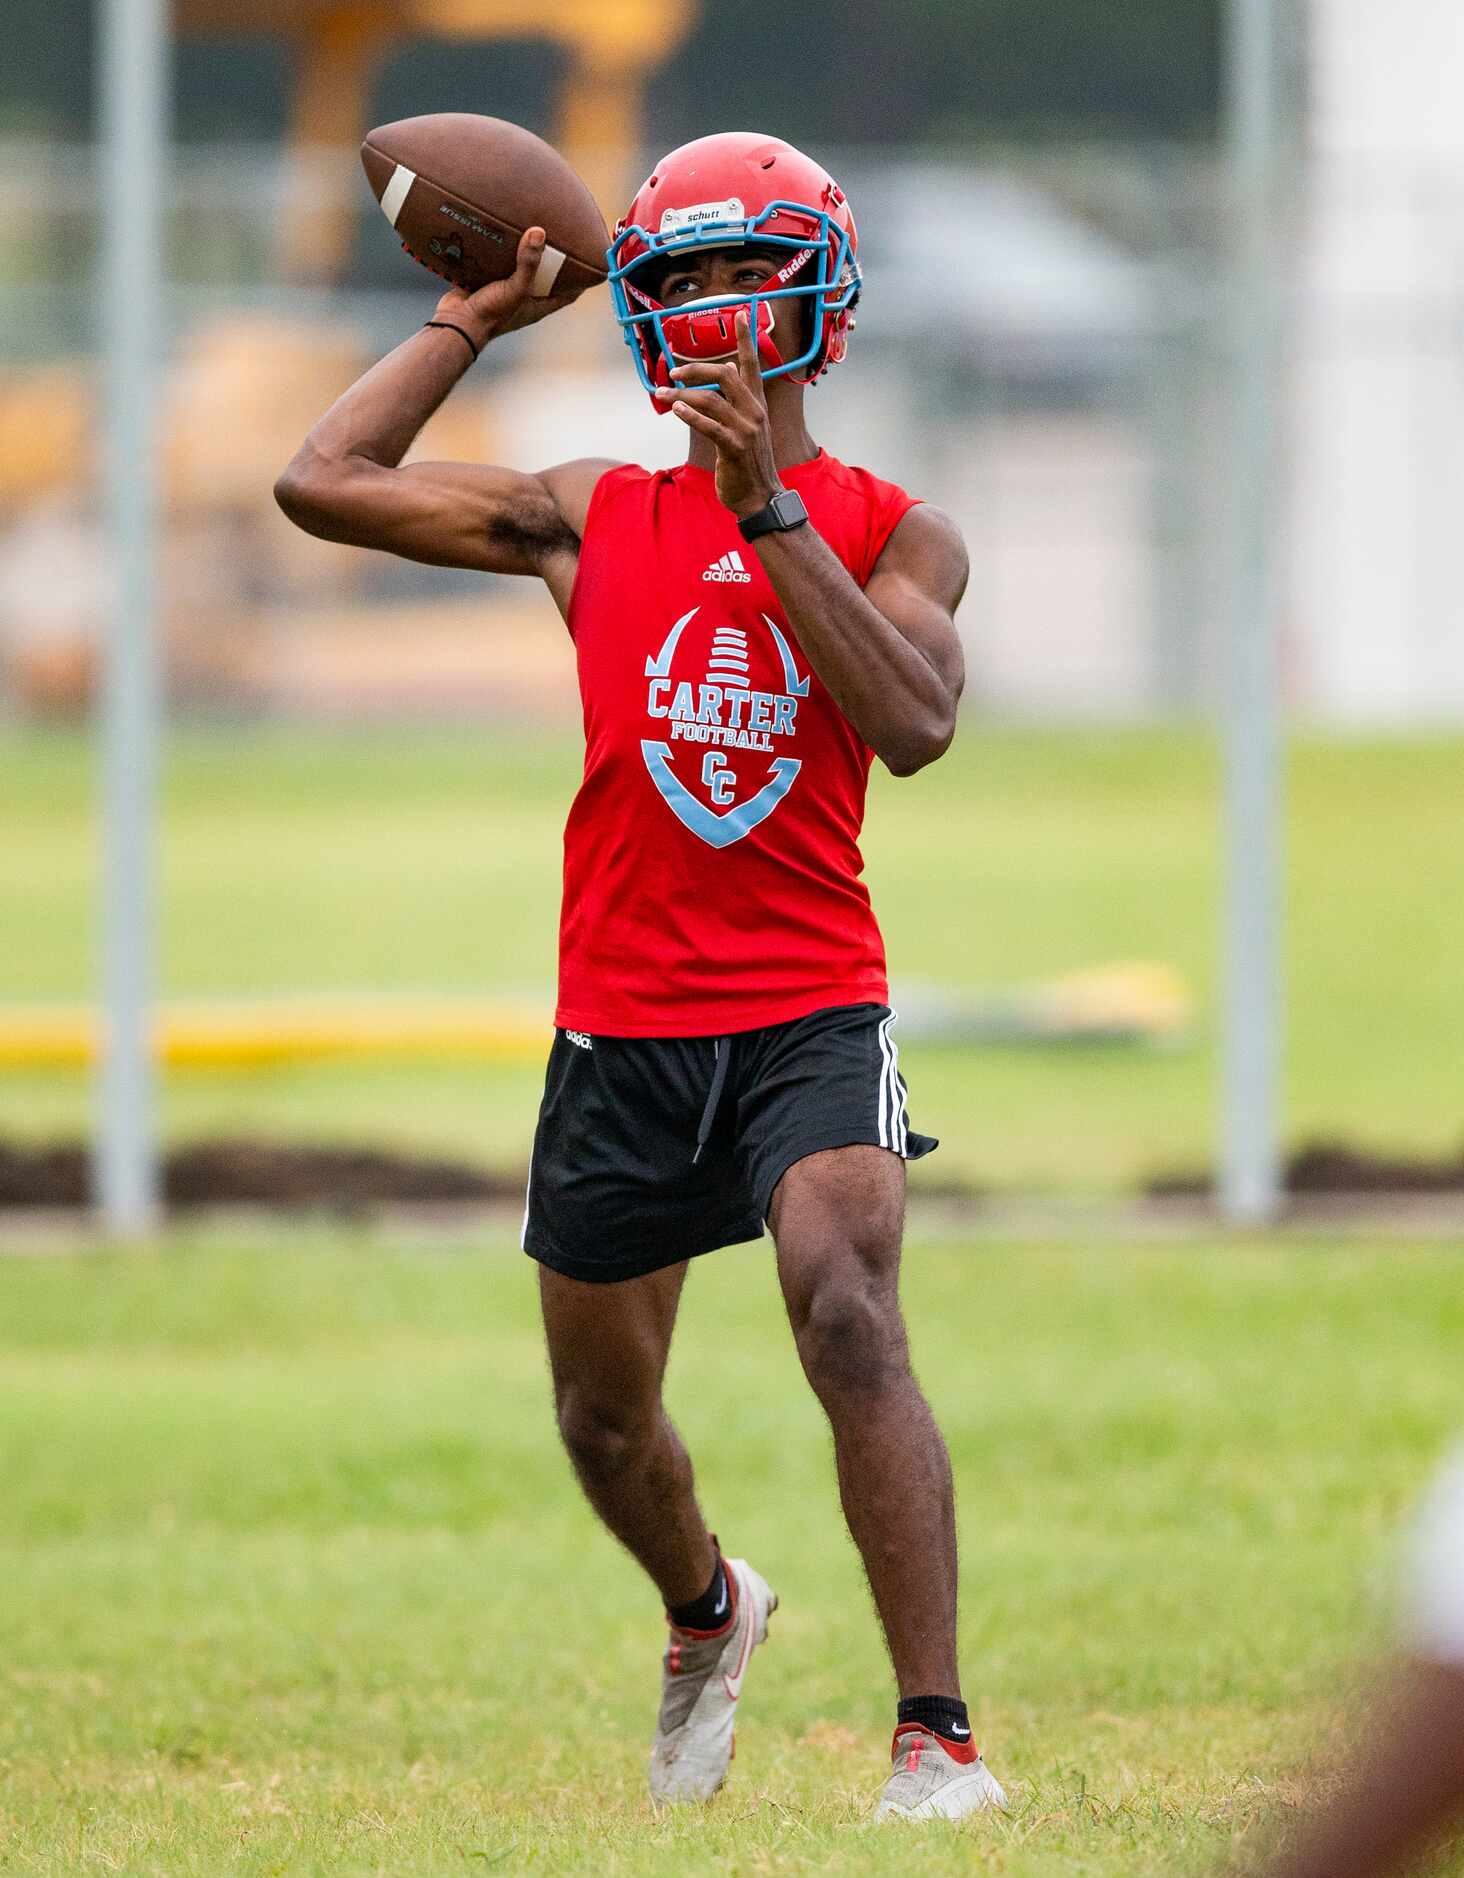 Carter senior quarterback William Young throws during the first day of football practice at...